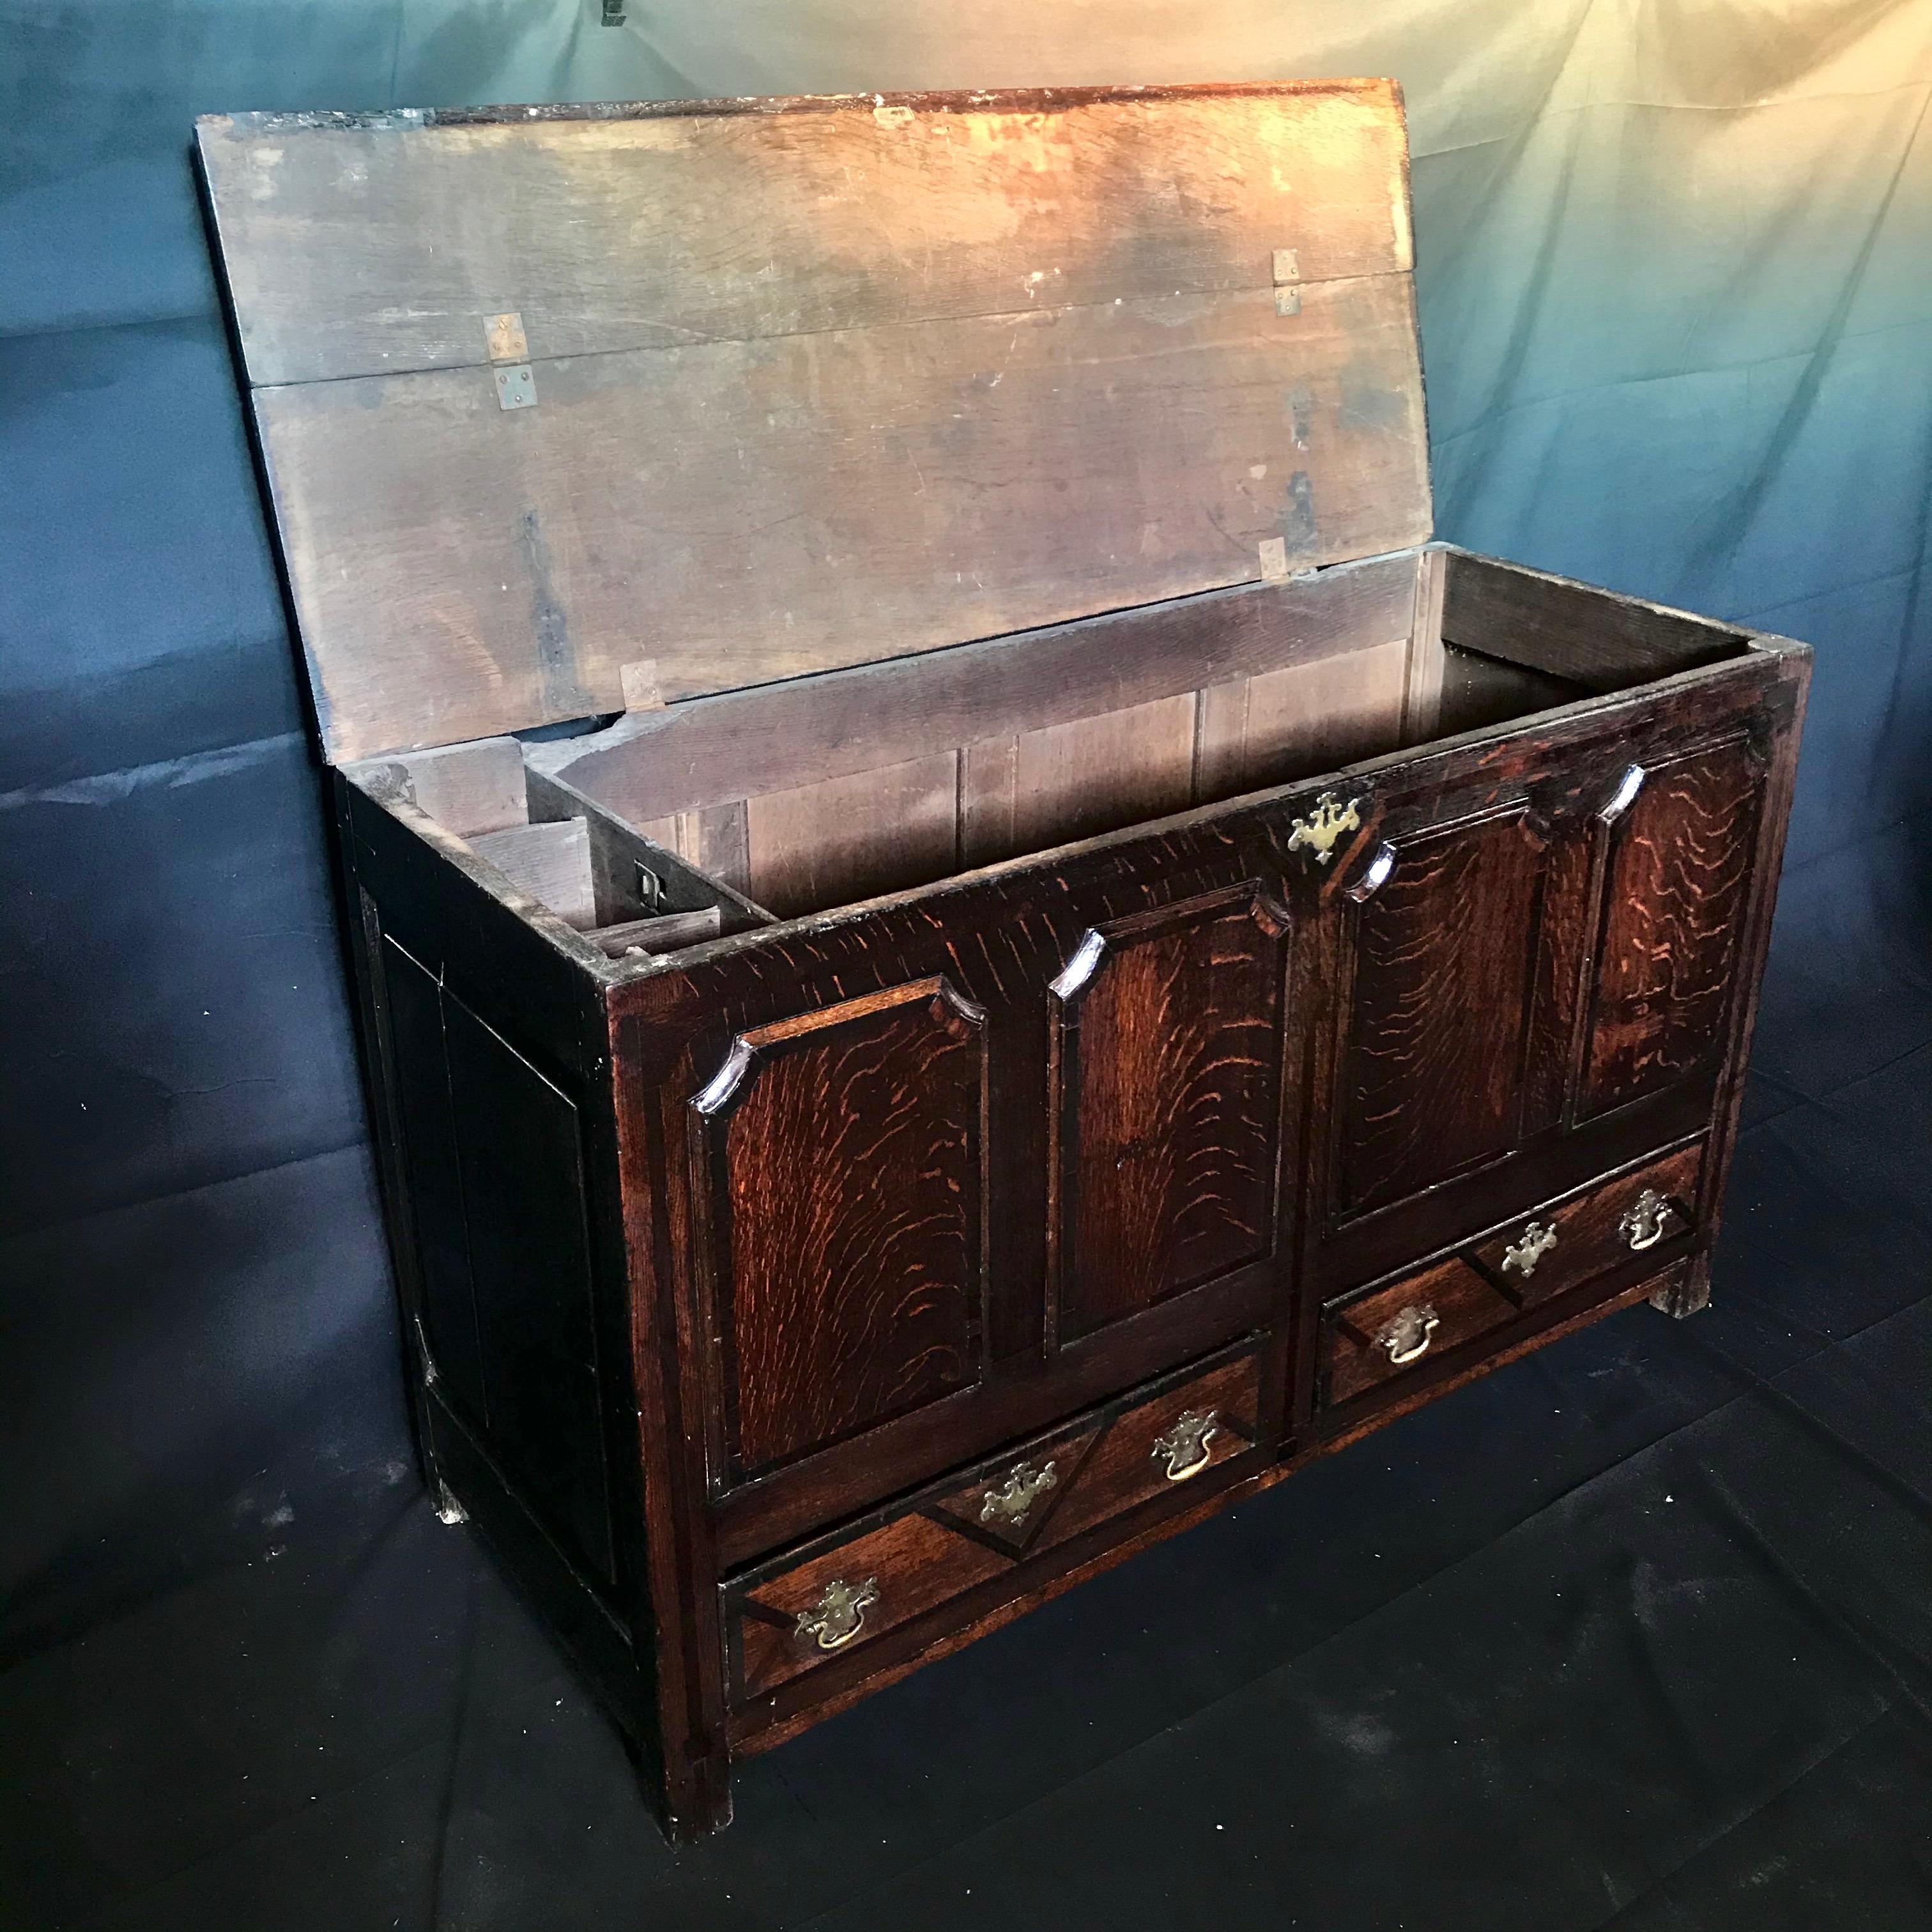 An exceptionally handsome 18th century British mule chest having a beautifully carved top section, flamed oak and inlaid drawers at the base with a very good patina and color. 
#3472.
 